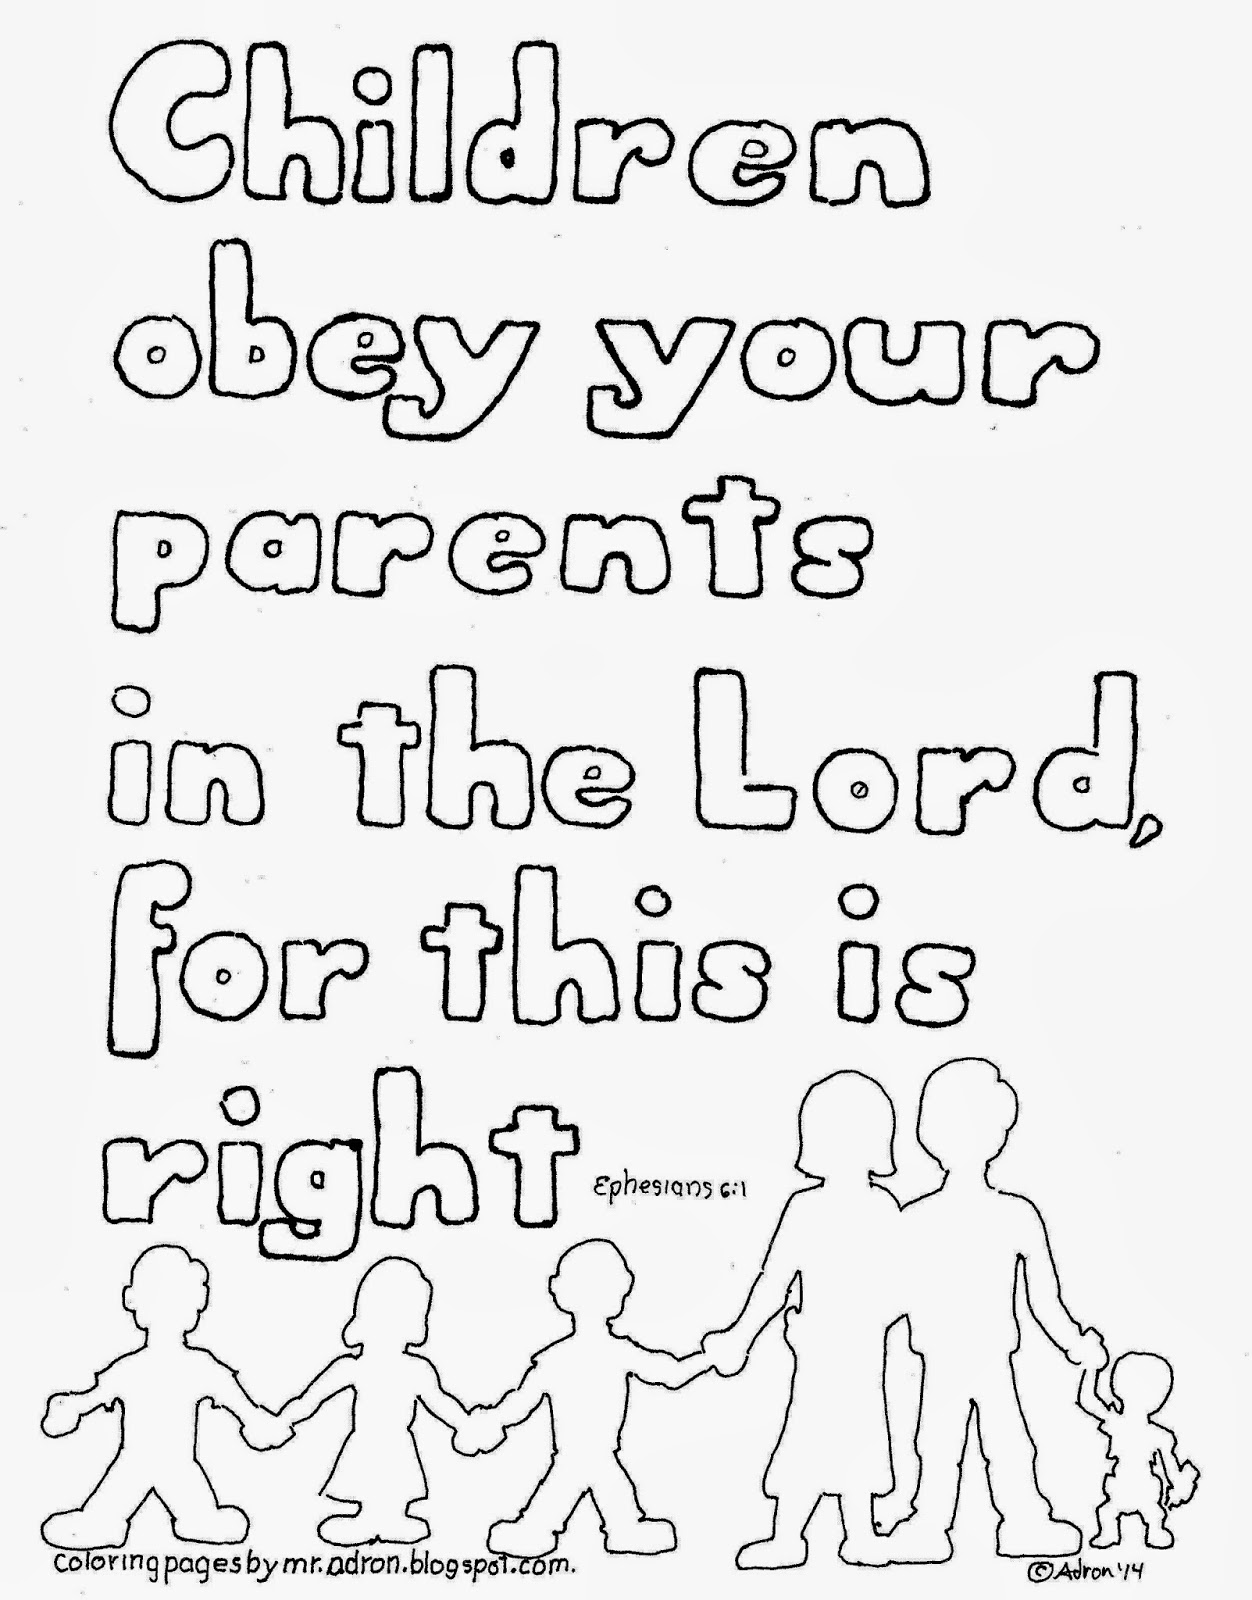 obedience coloring pages for children - photo #25